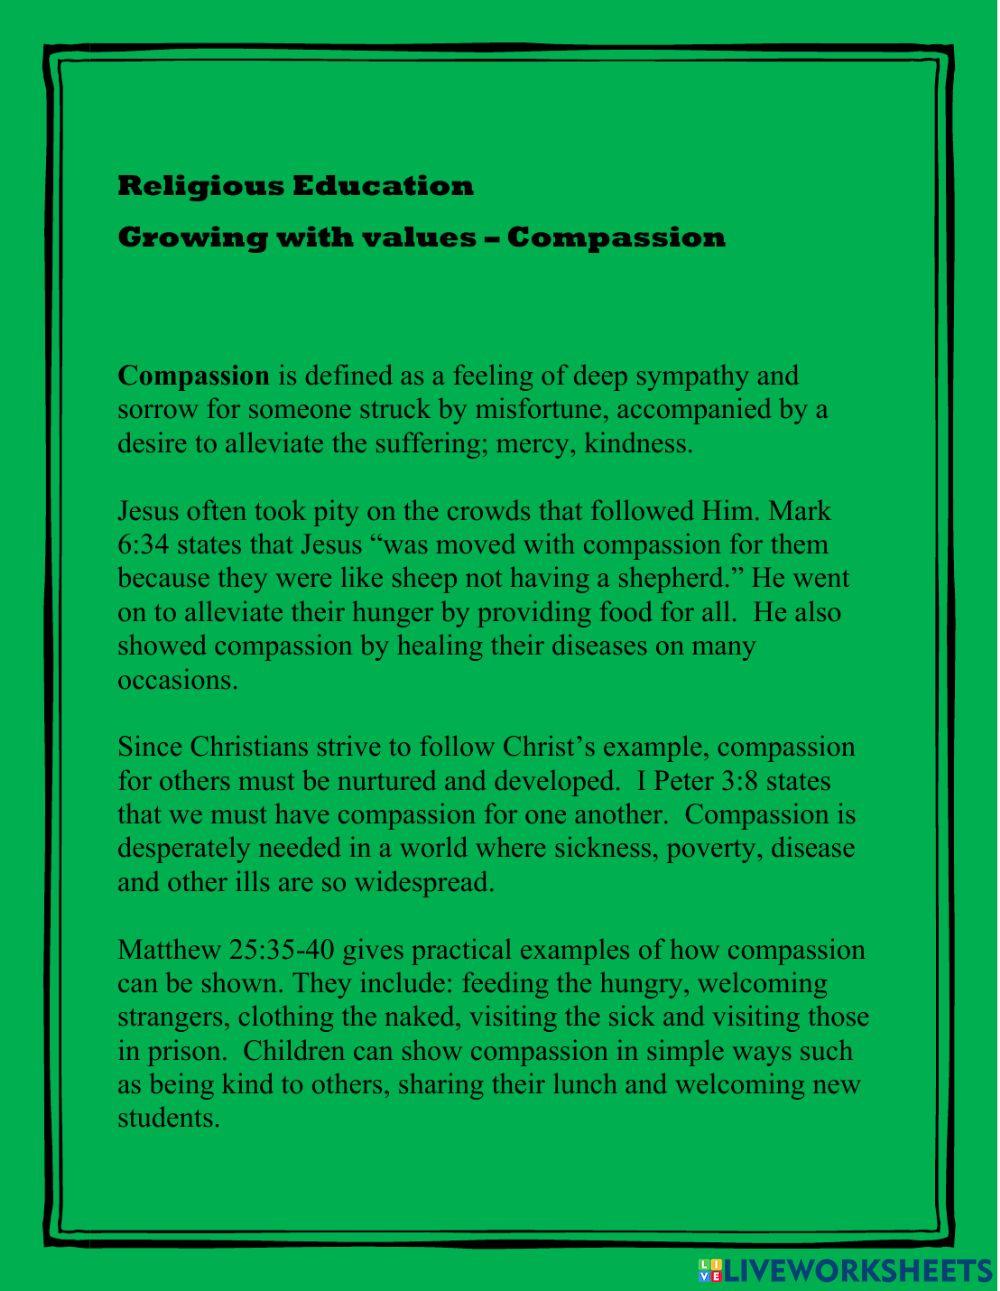 Growing with Values - Compassion Notes